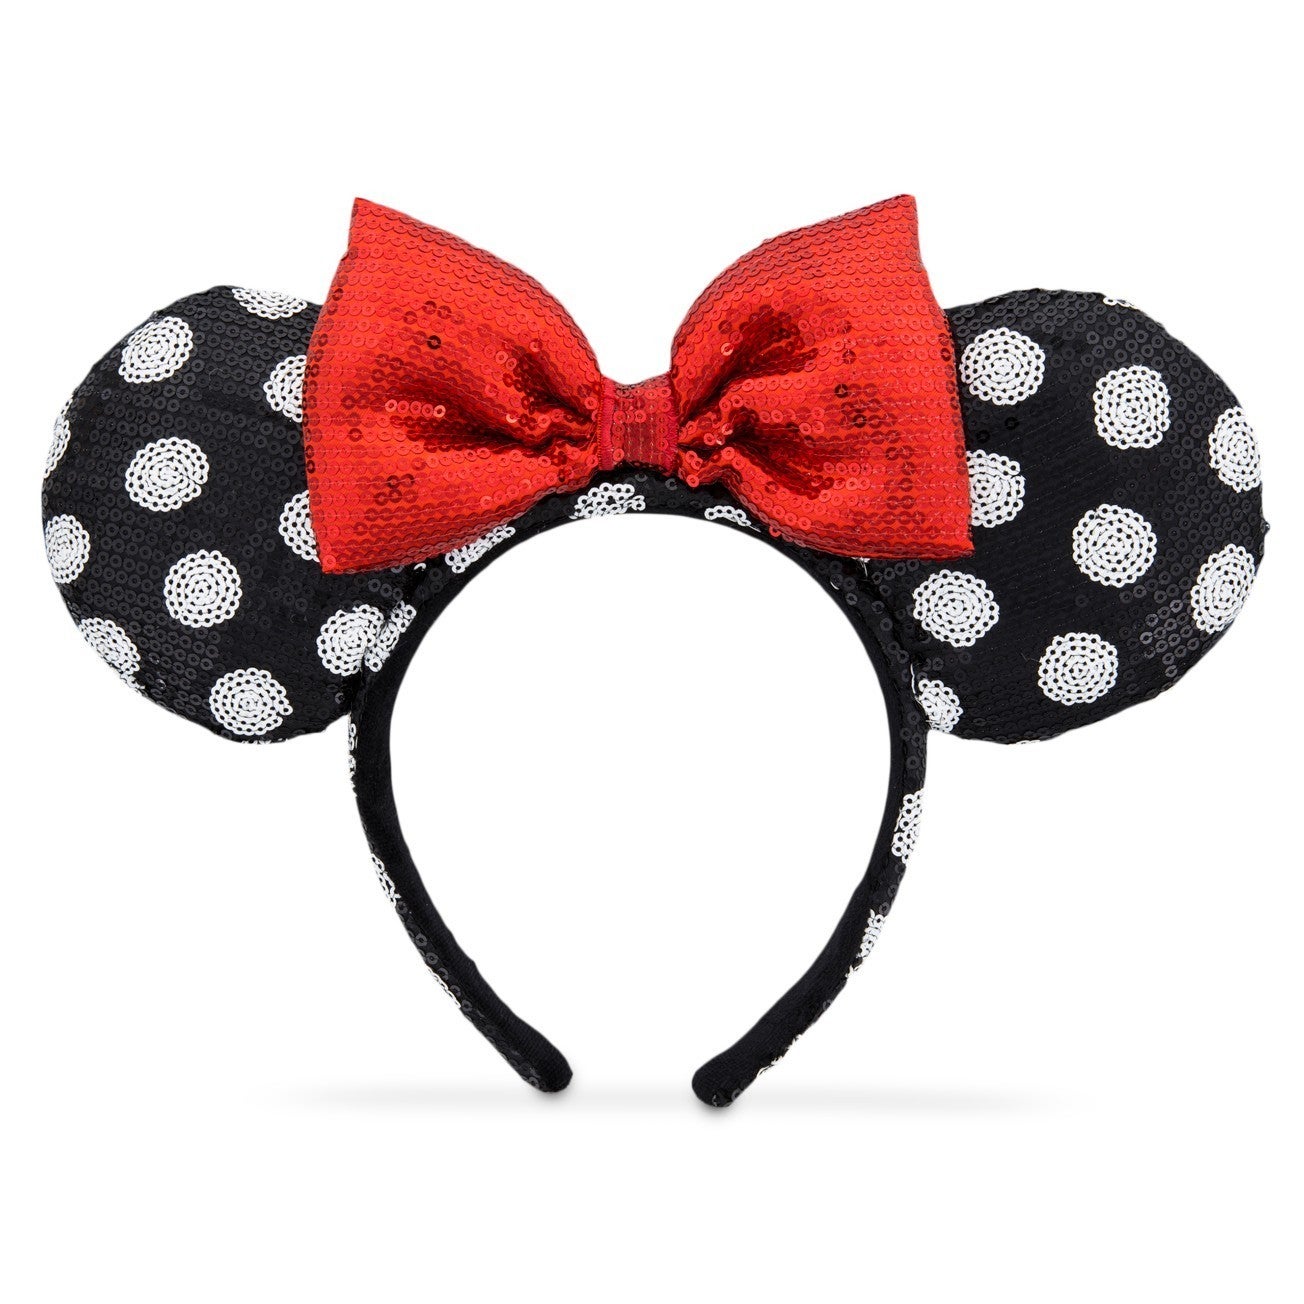 Black and White Red Bow Polka Dot Minnie Mouse Ear Headband